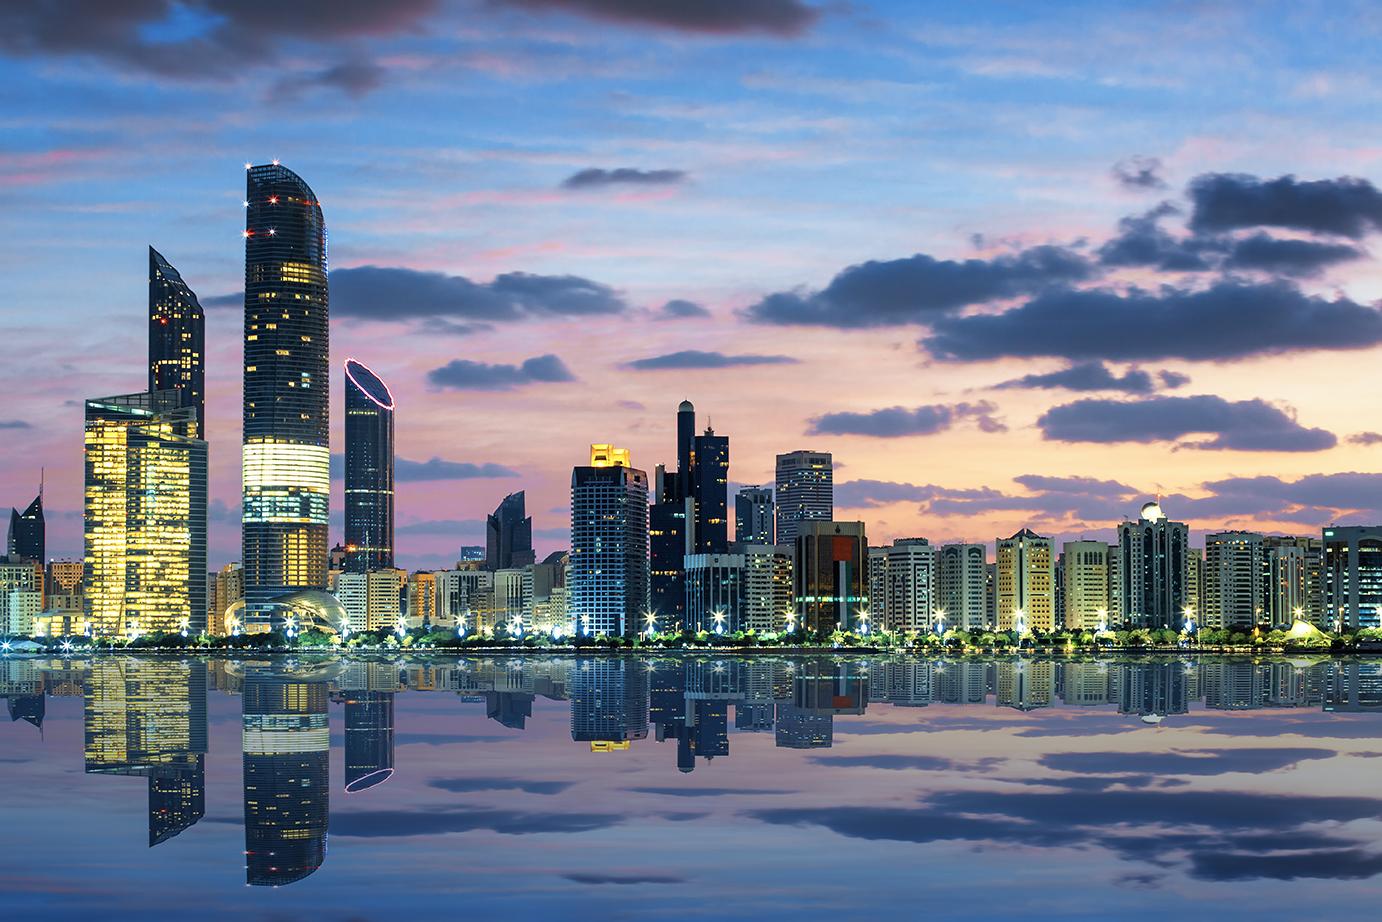 Environics opens a new office in Abu Dhabi, in October 2021.